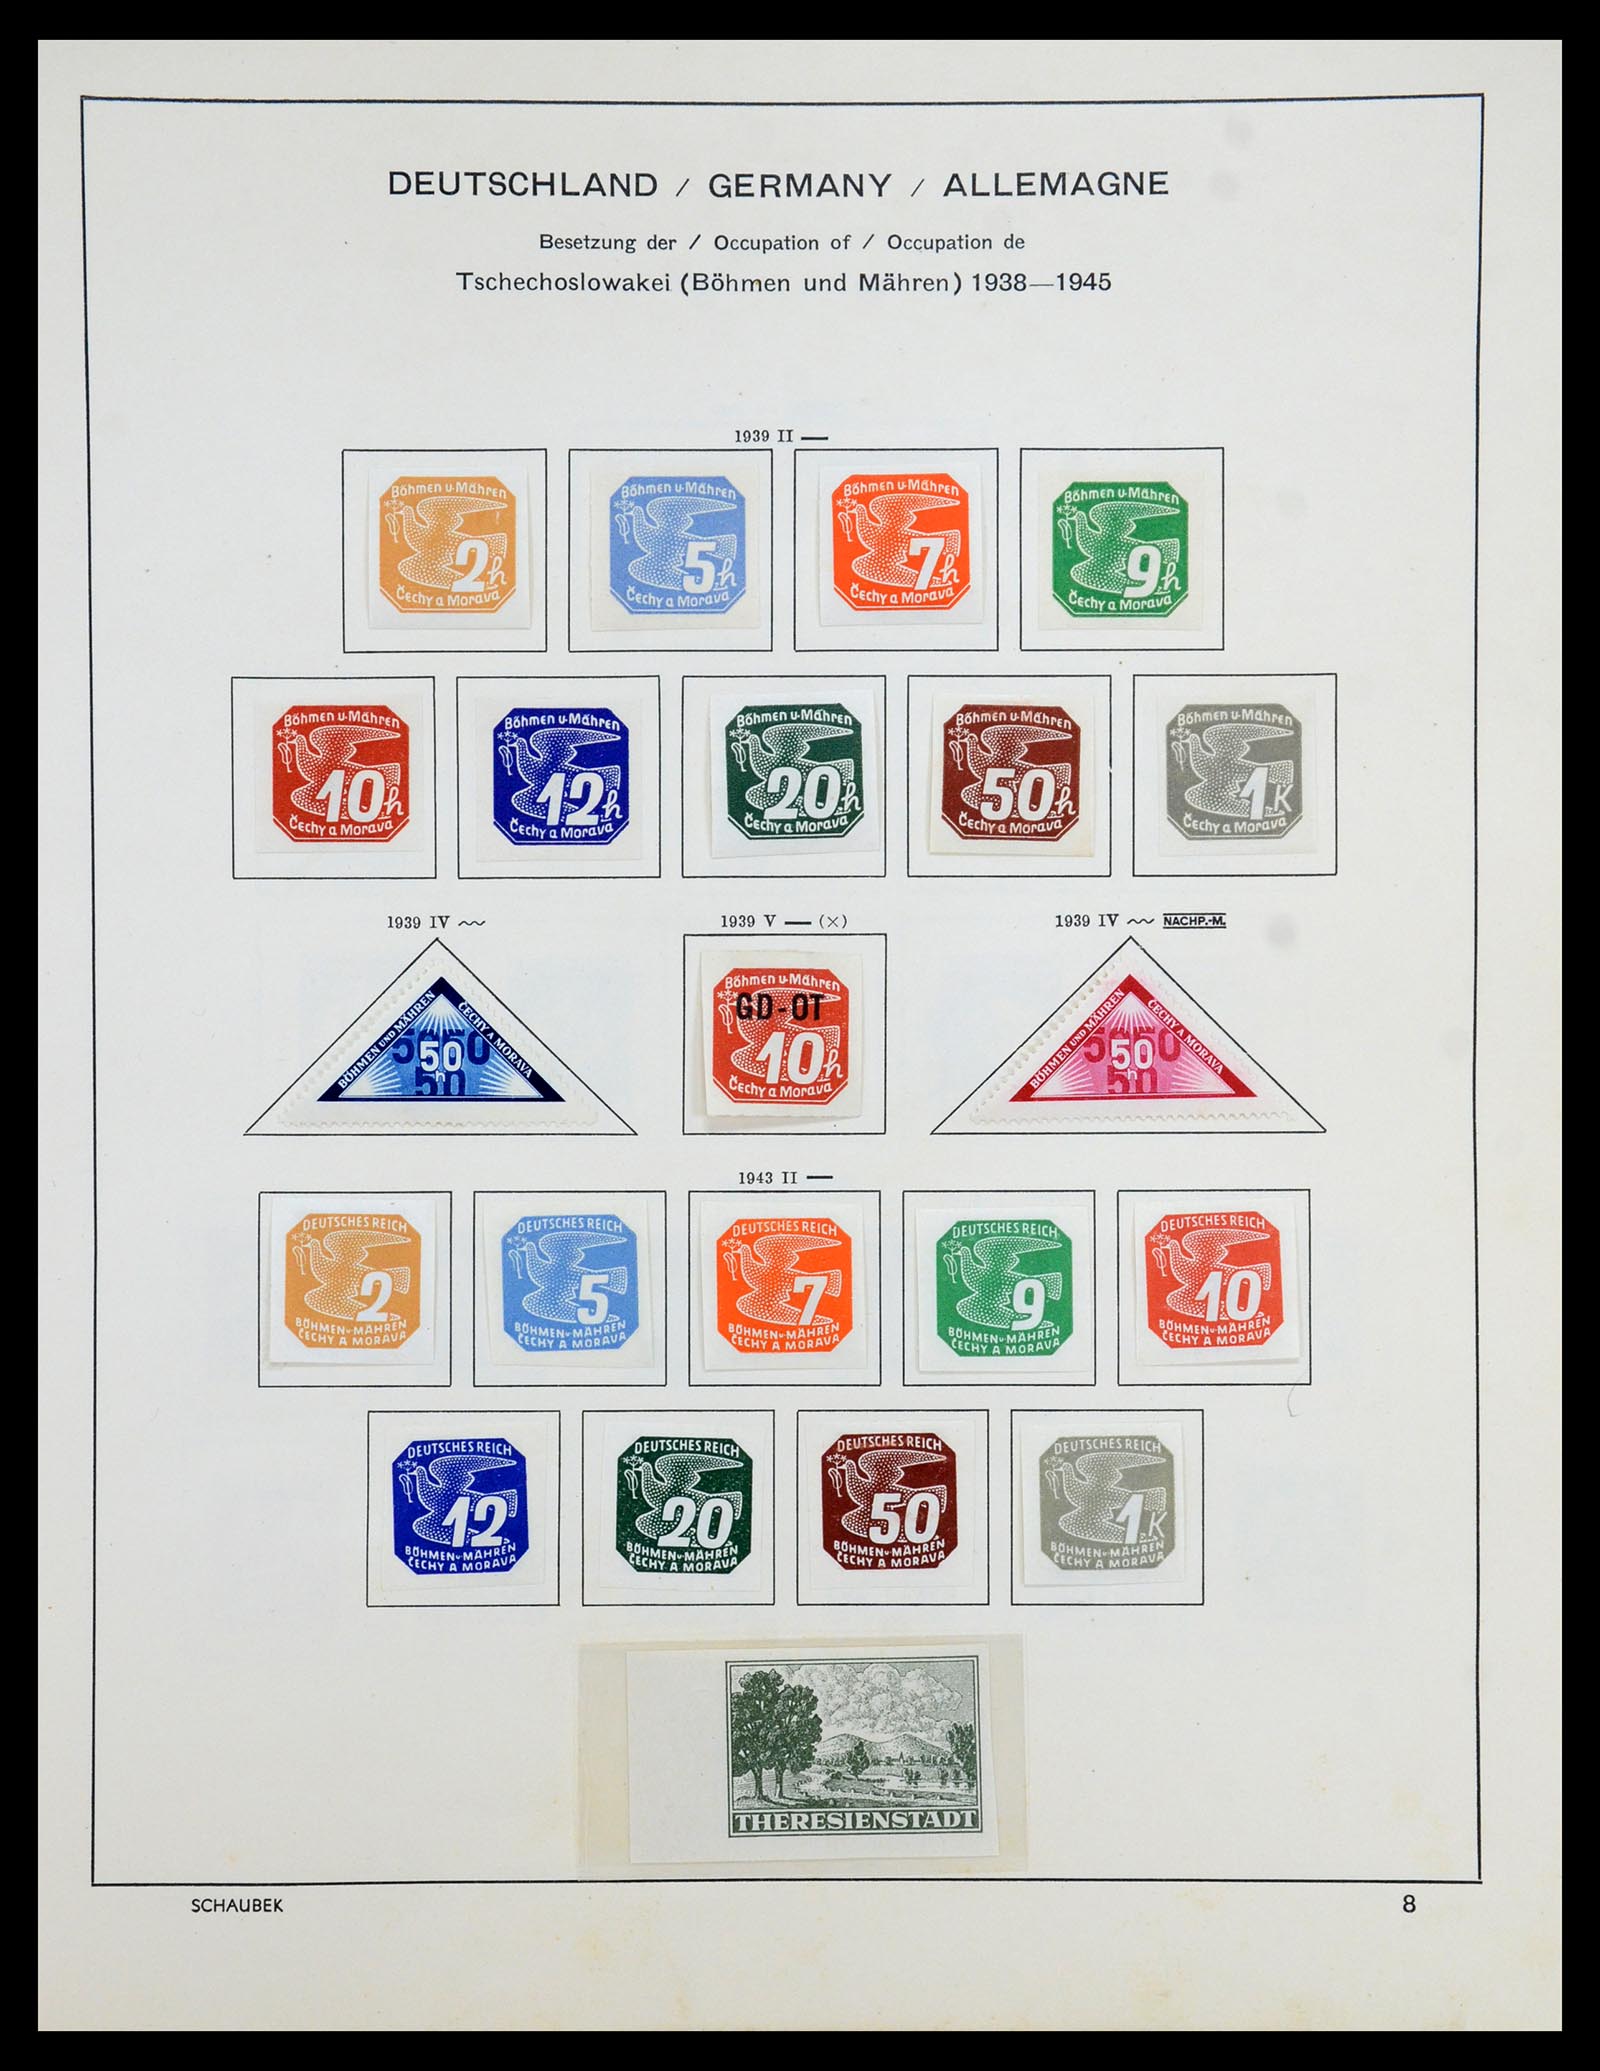 35964 027 - Stamp collection 35964 Germany occupations WW II 1939-1945.